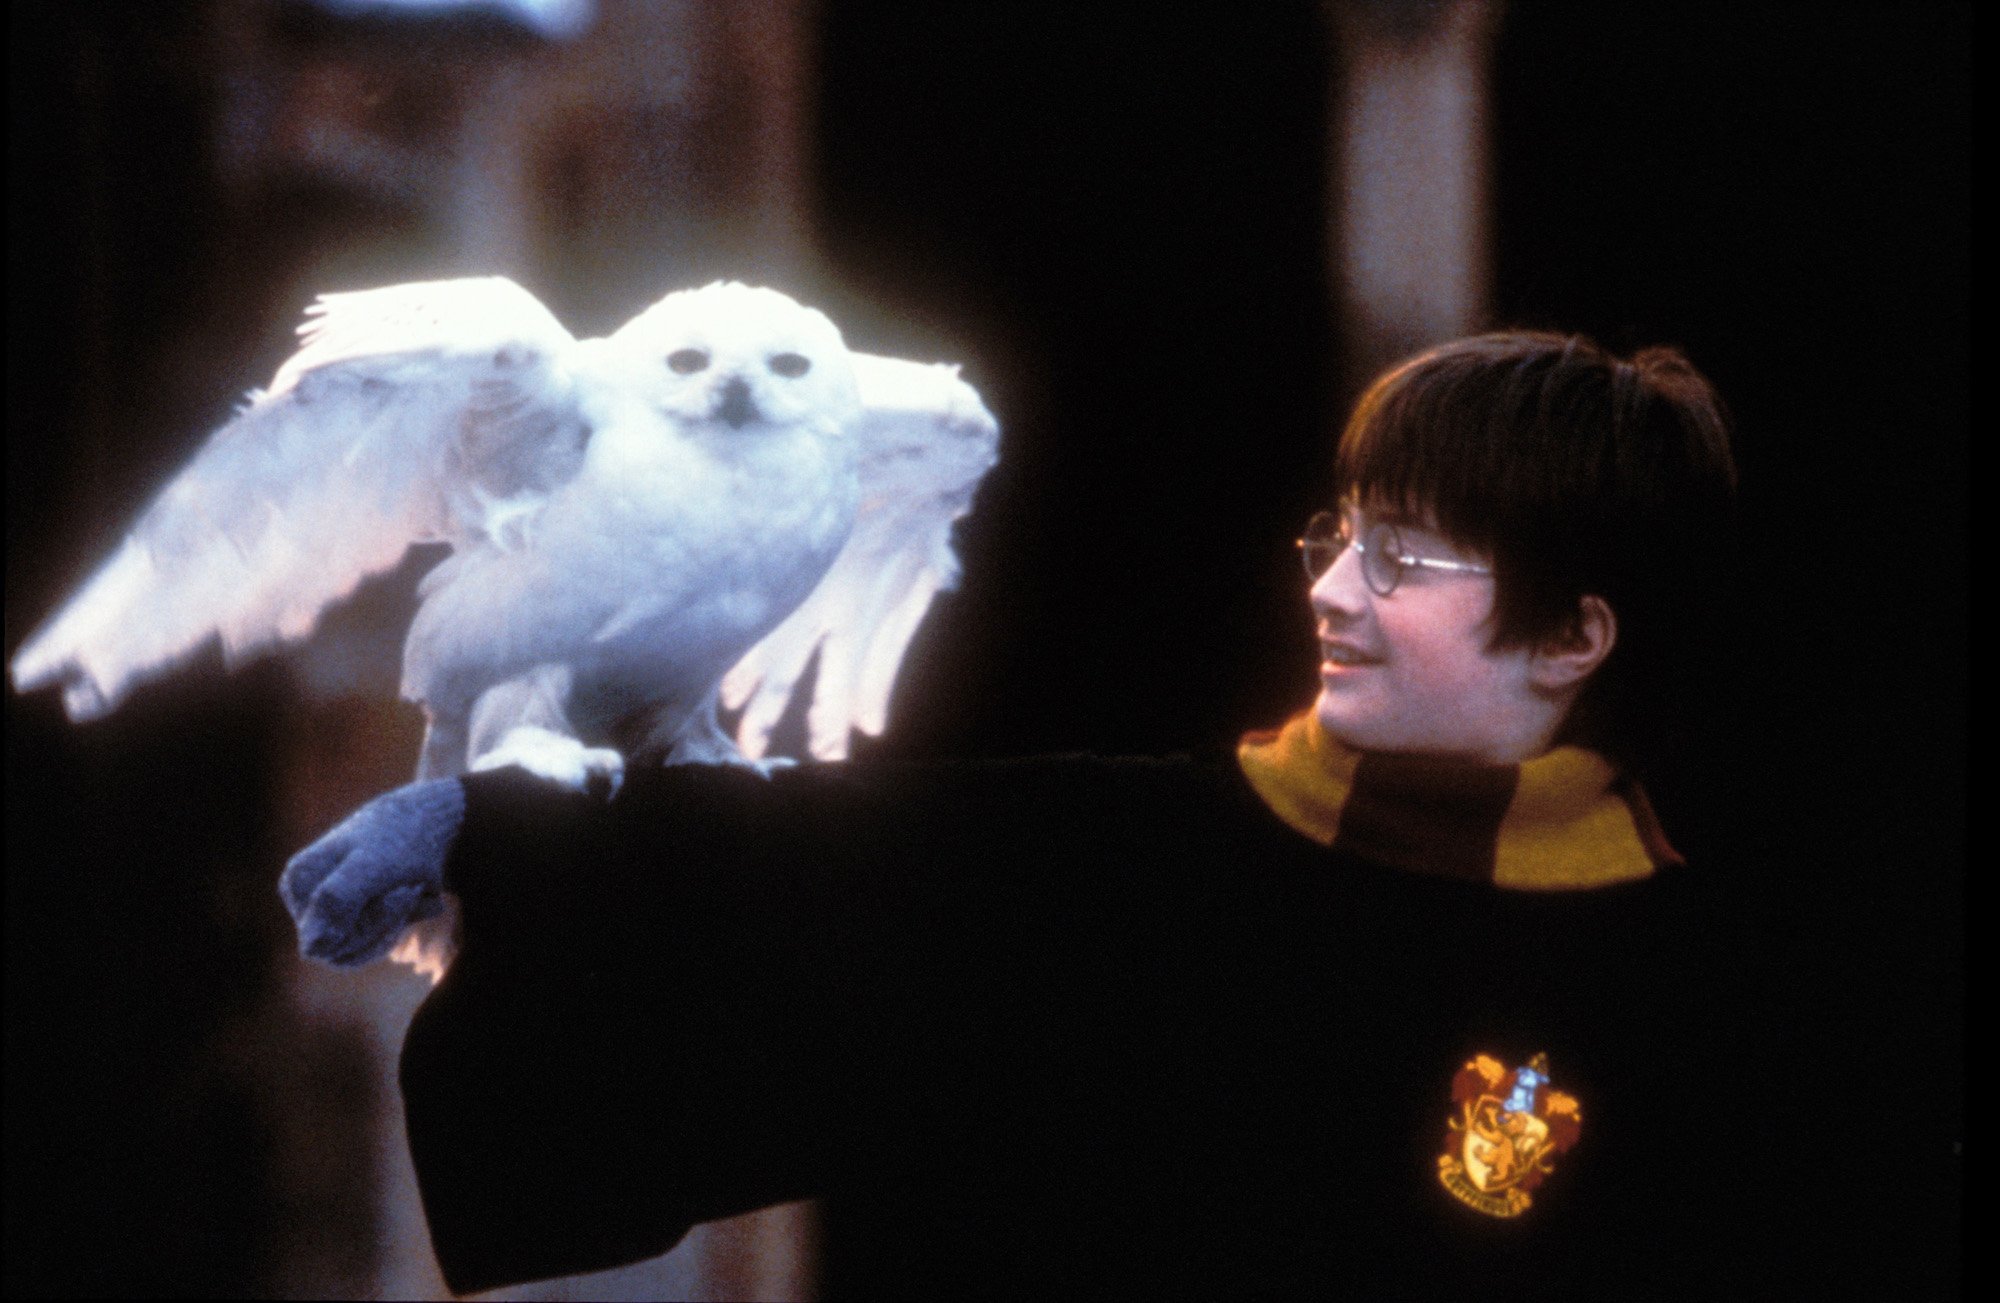 Danielle Radcliffe as Harry Potter smiling at an owl perched on his arm